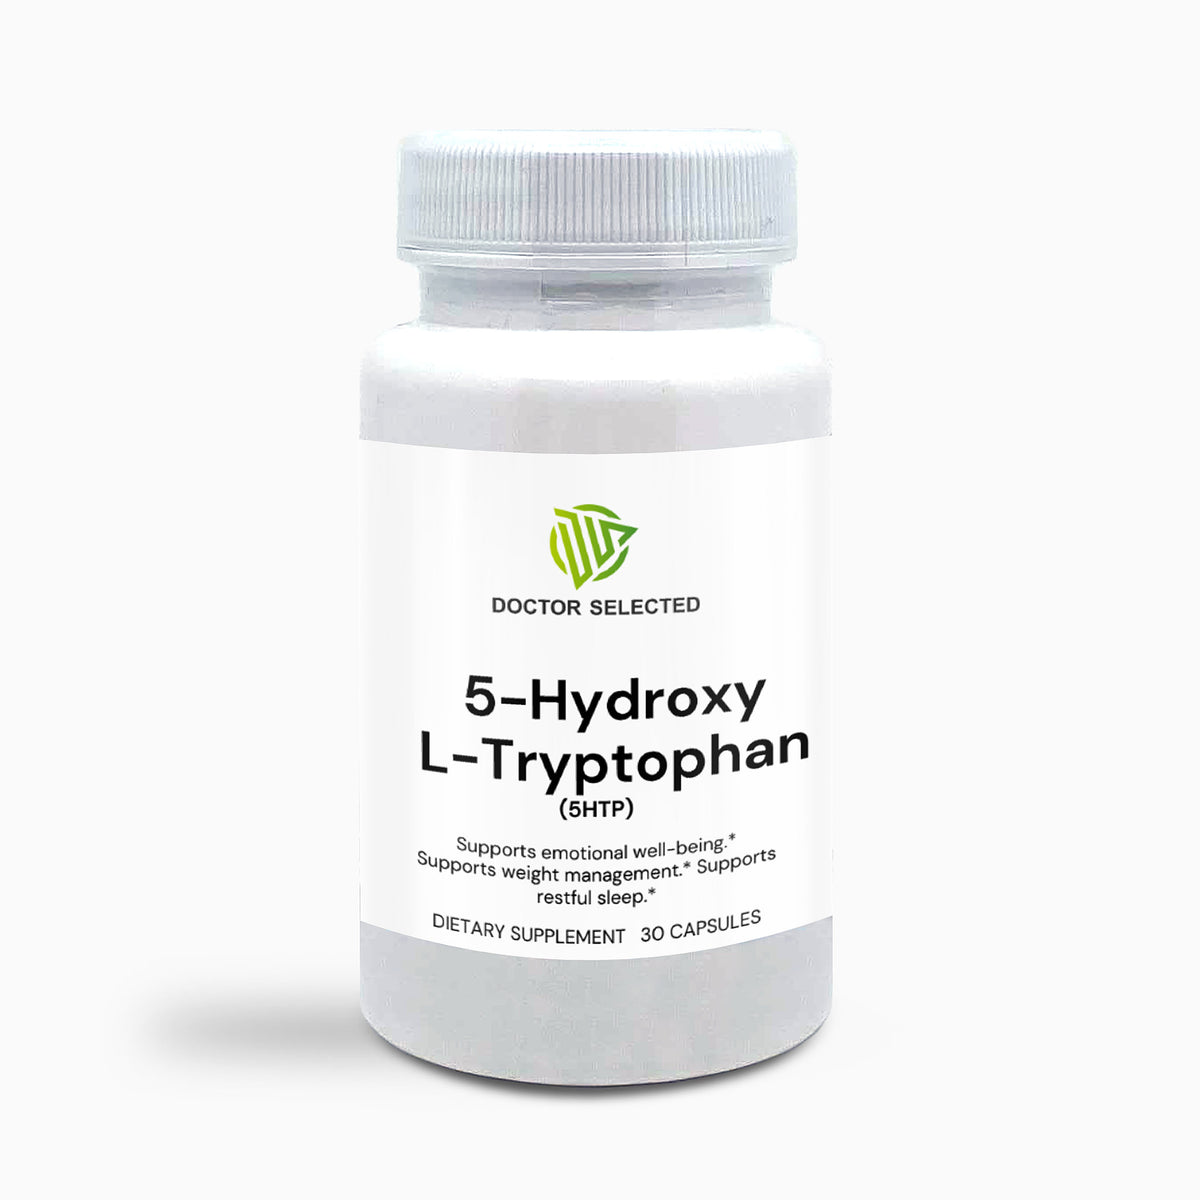 Doctor Selected™ 5-Hydroxy L-Tryptophan (5HTP)